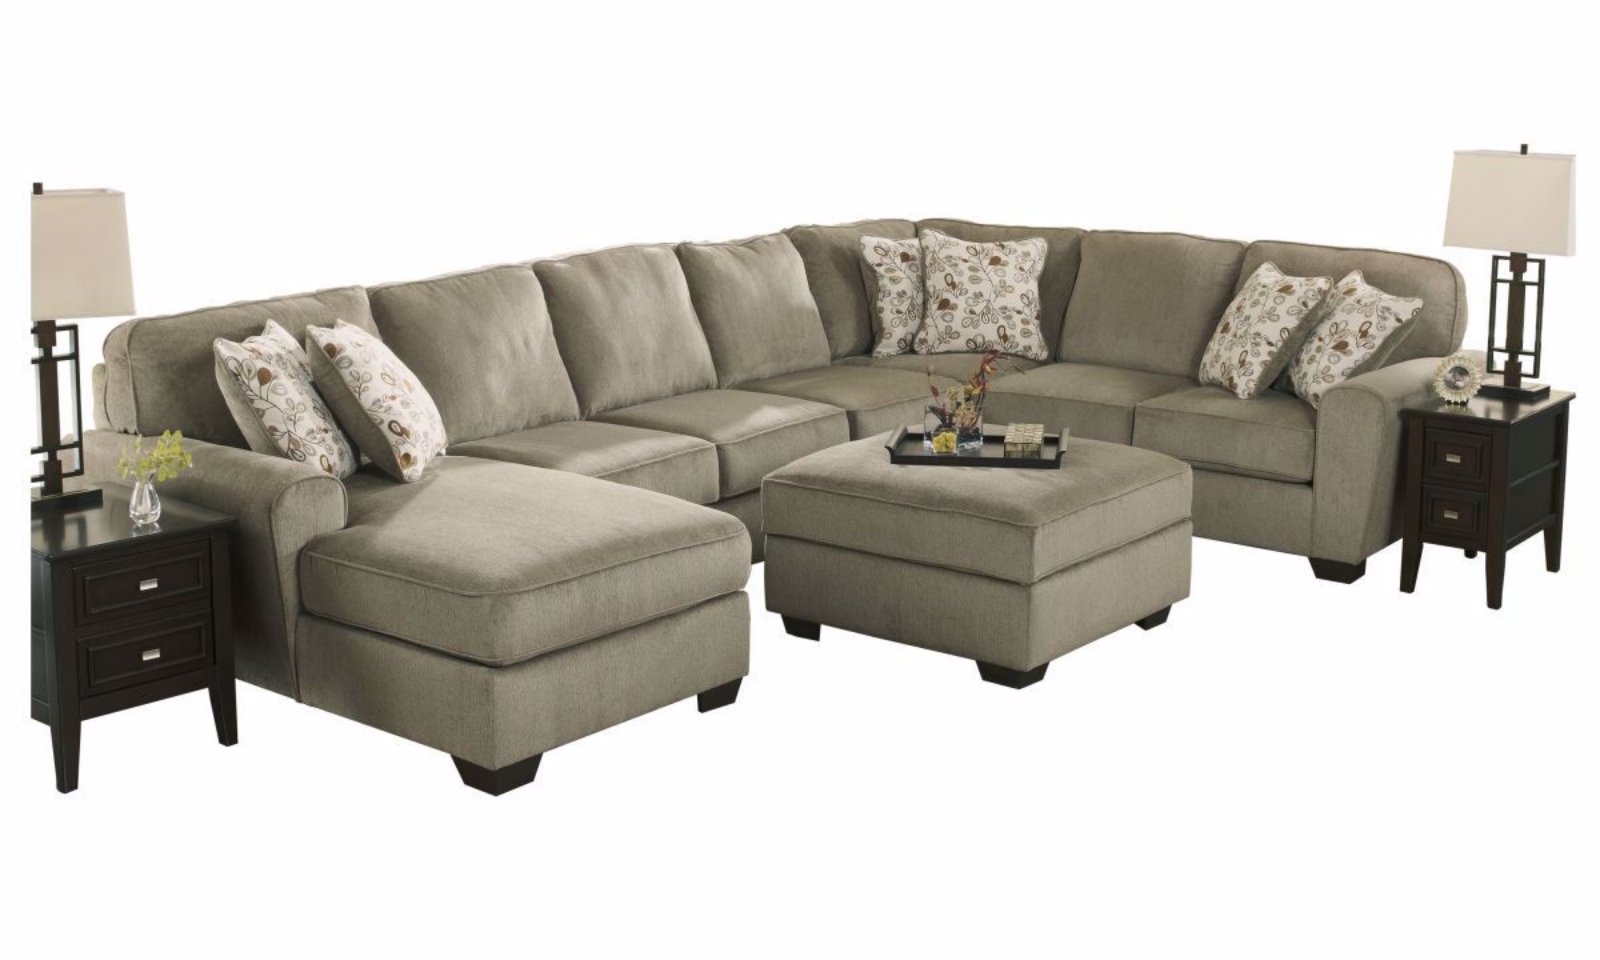 Picture of Patola Park Sectional with Ottoman